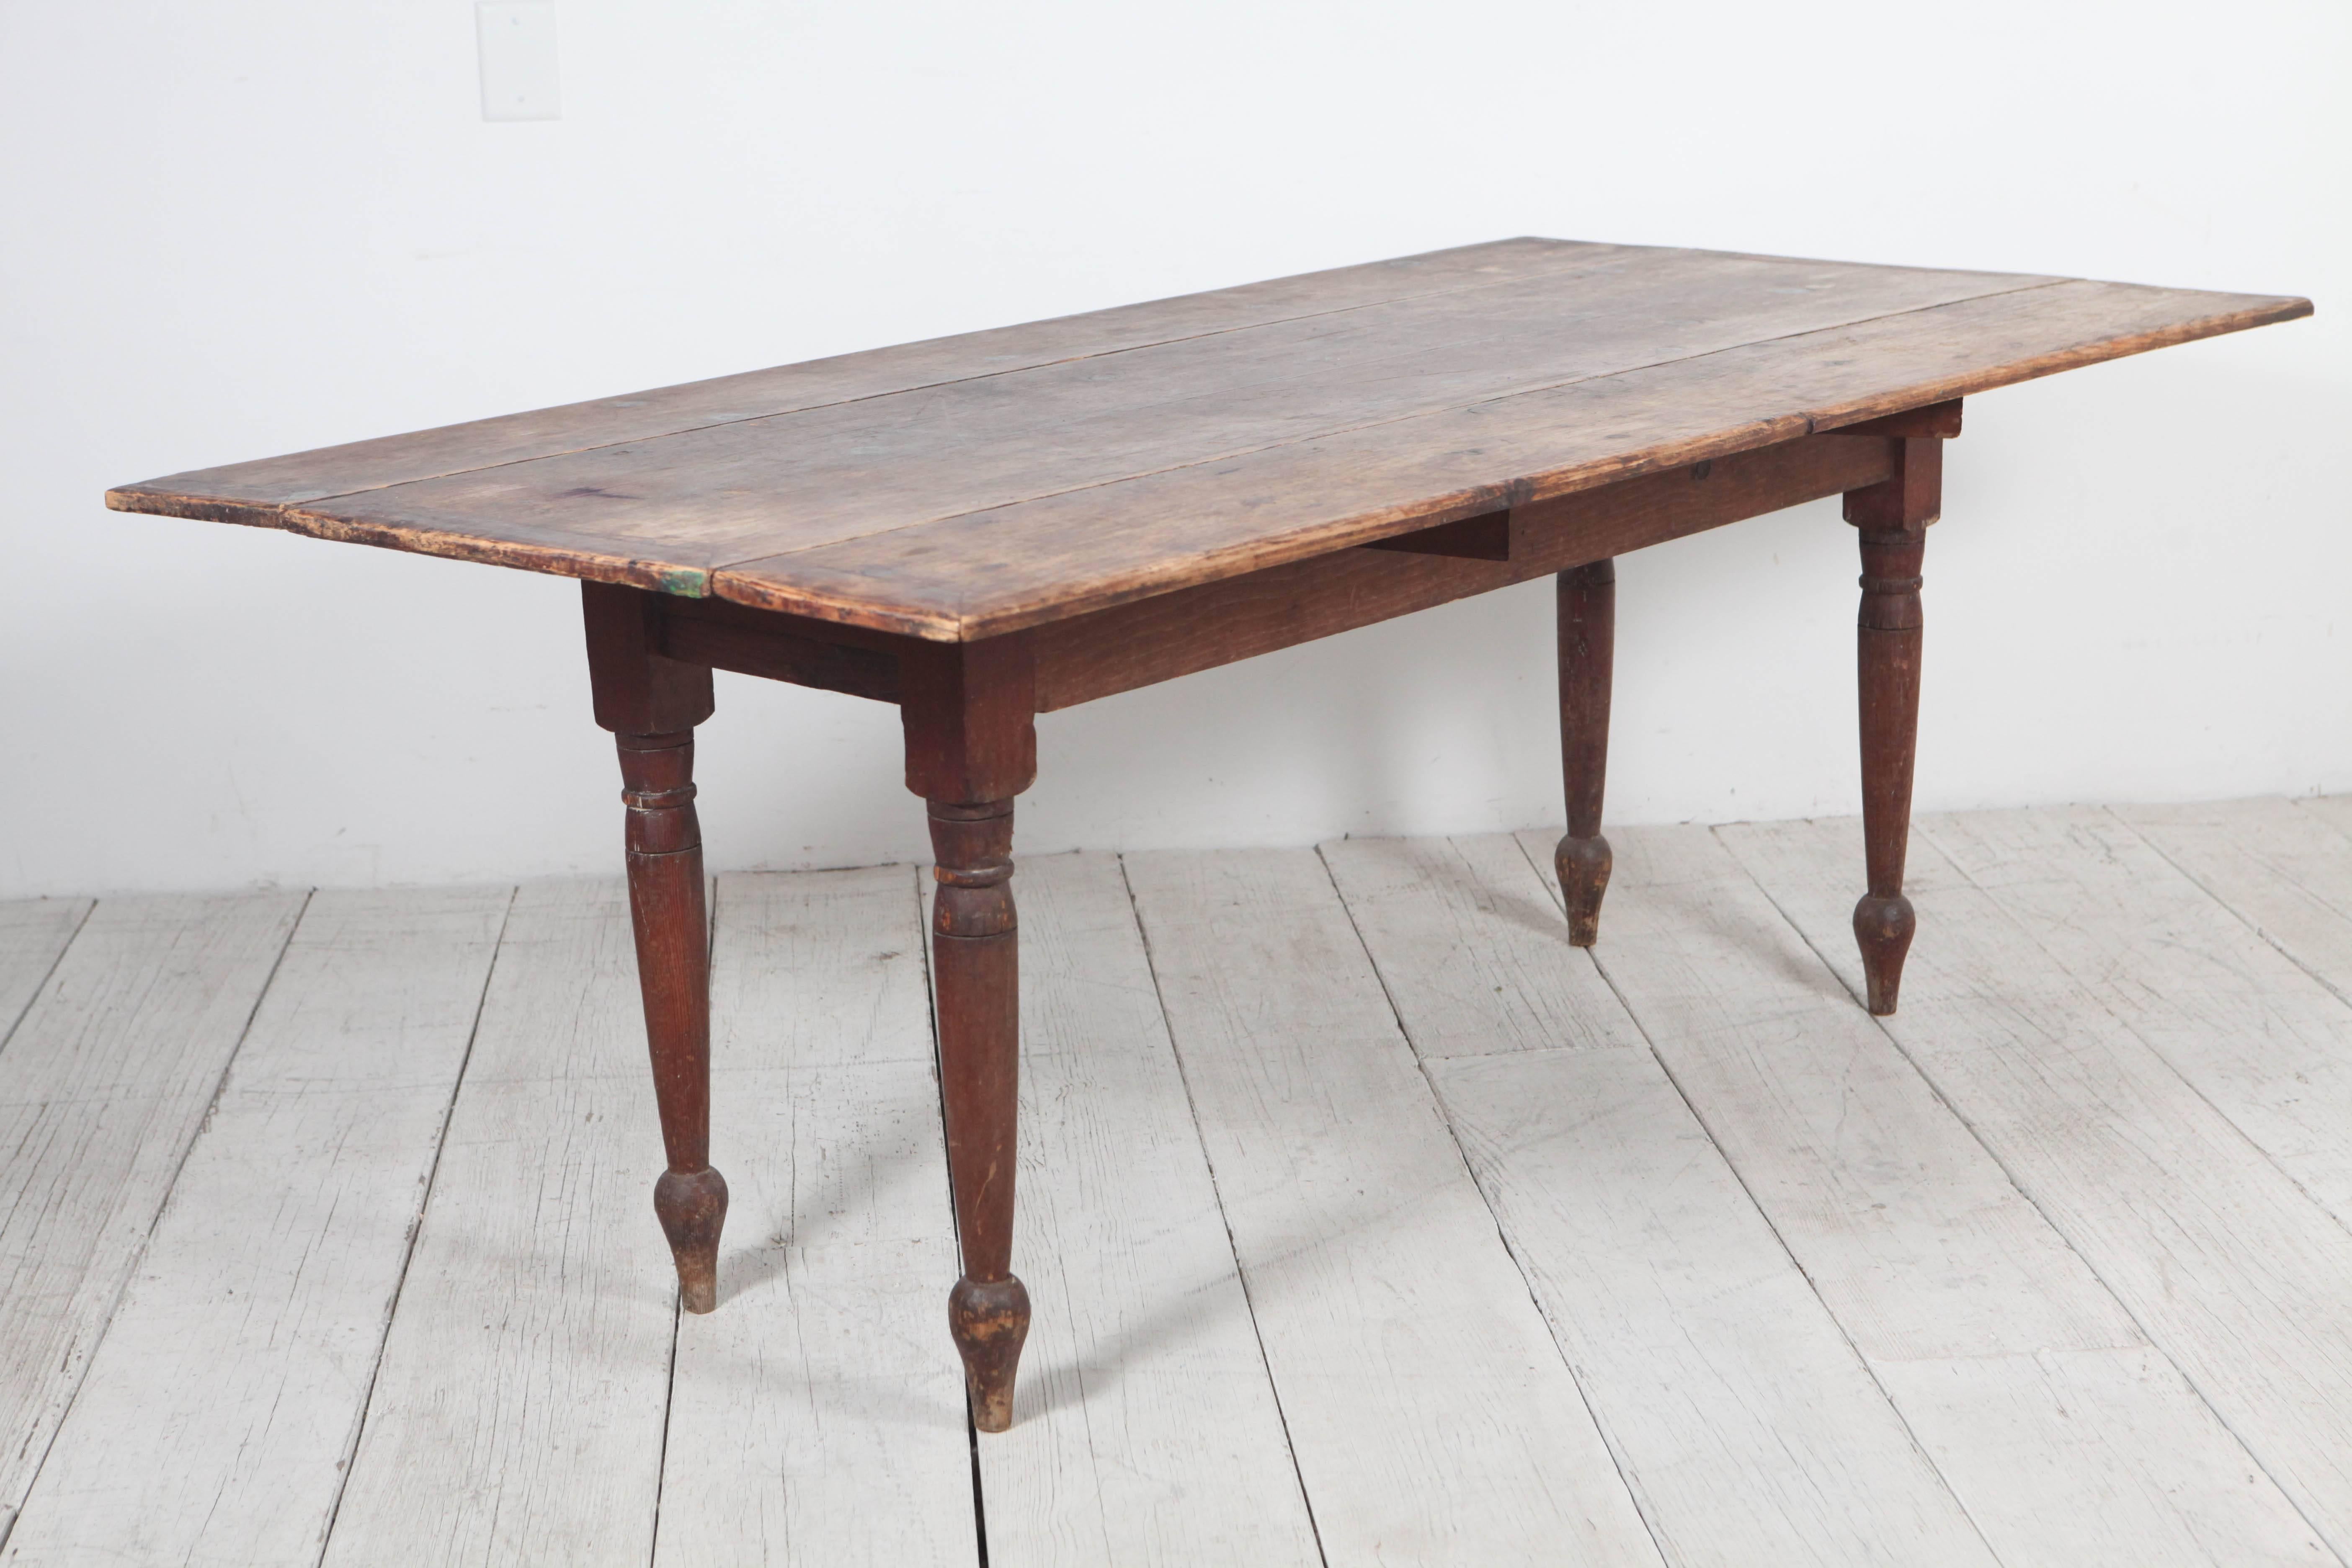 Rustic Drop-Leaf Wooden Table with Turned Legs 3